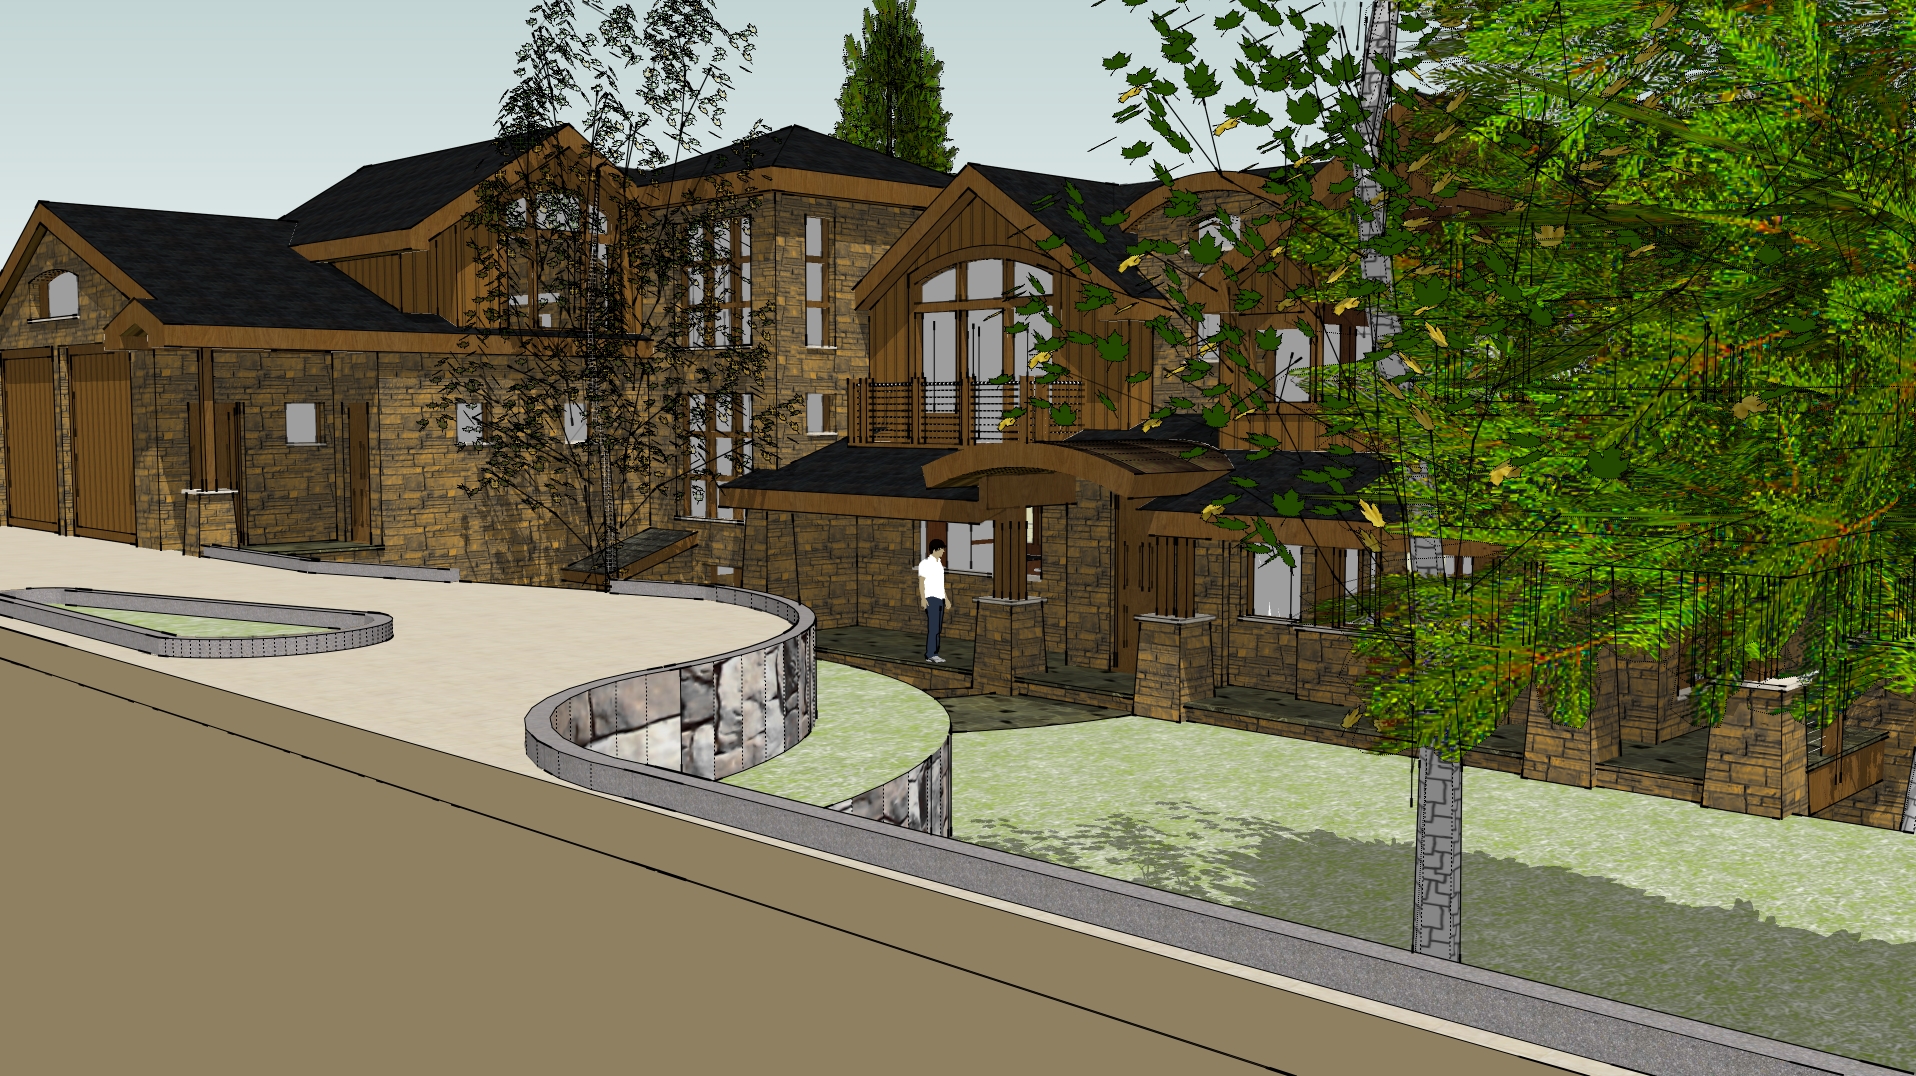 WEST FOREST ROAD VAIL CONCEPT